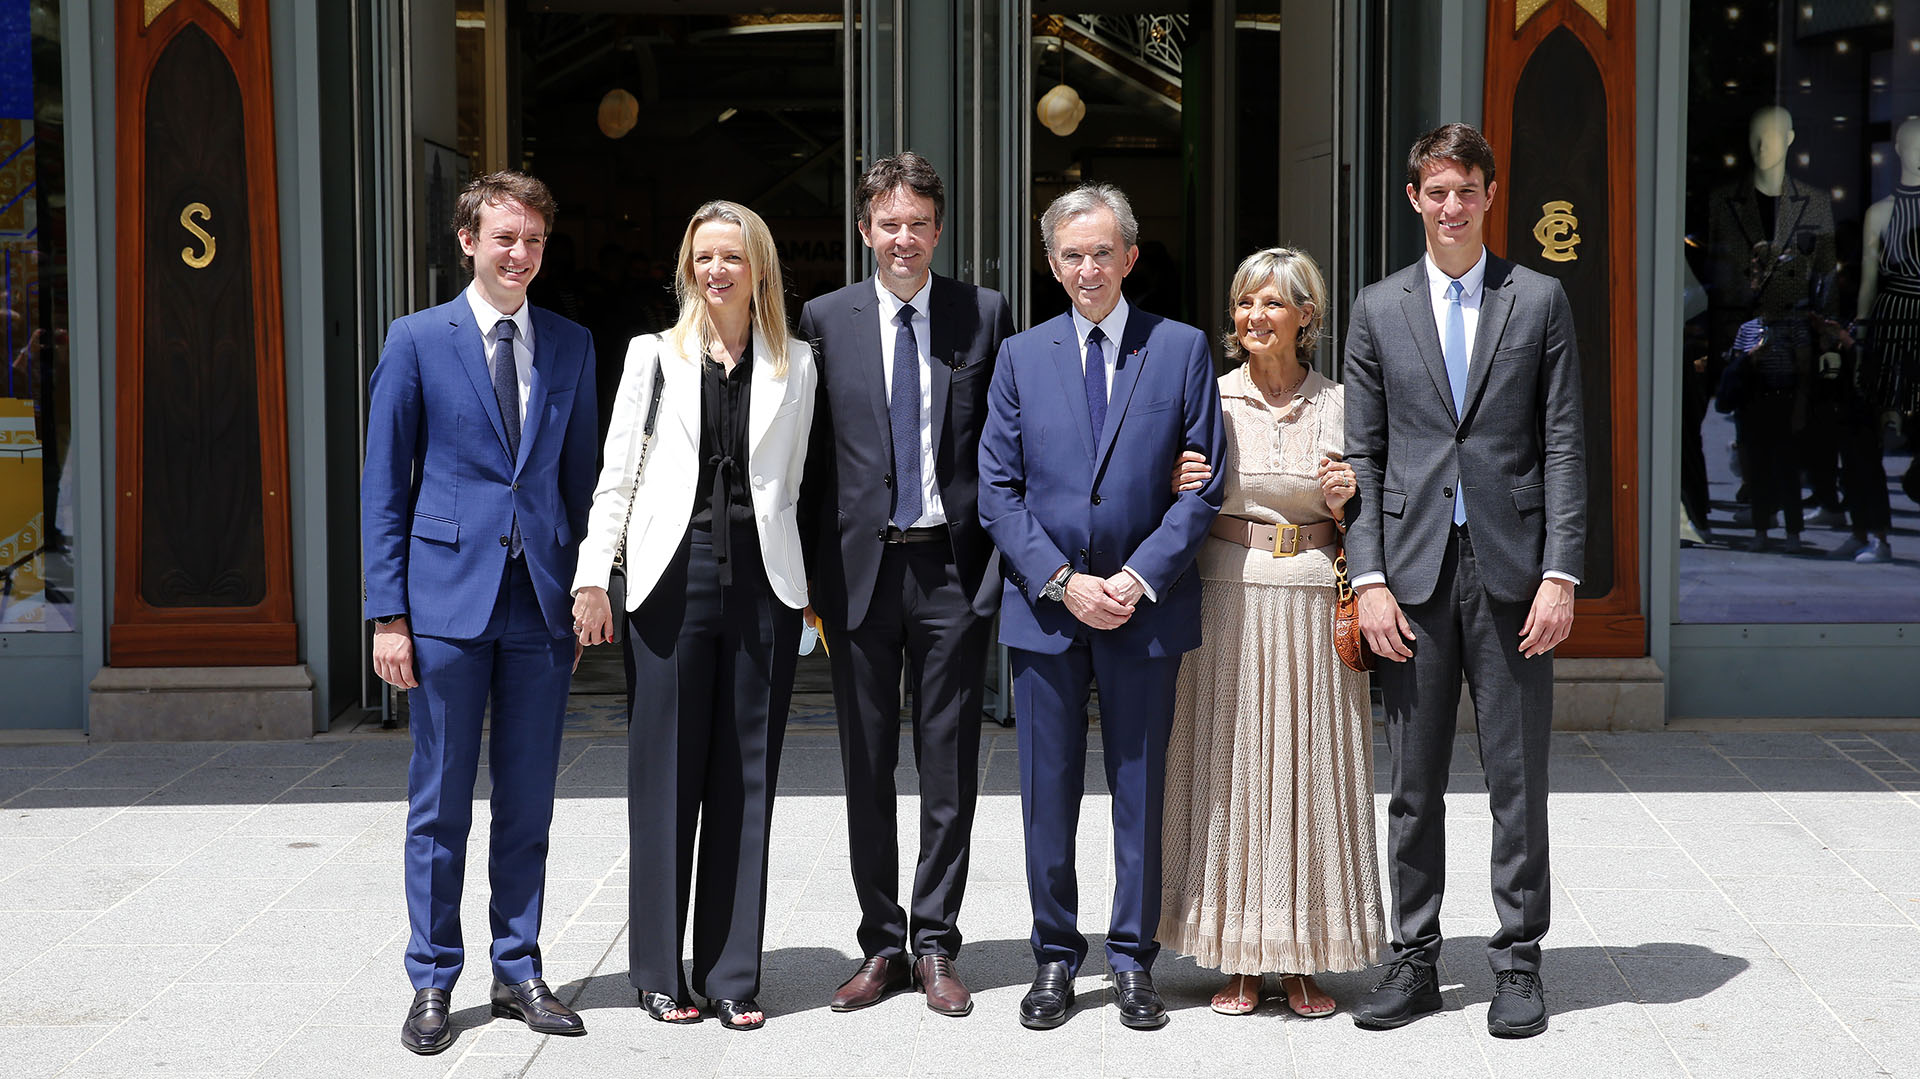 Bernard Arnold (C) and his wife Helen with their children (from left) Frederic Arnold, Delphine Arnold, Antoine Arnold and Alexandre Arnold in an April 2021 photo (Chesnot/Getty Images)